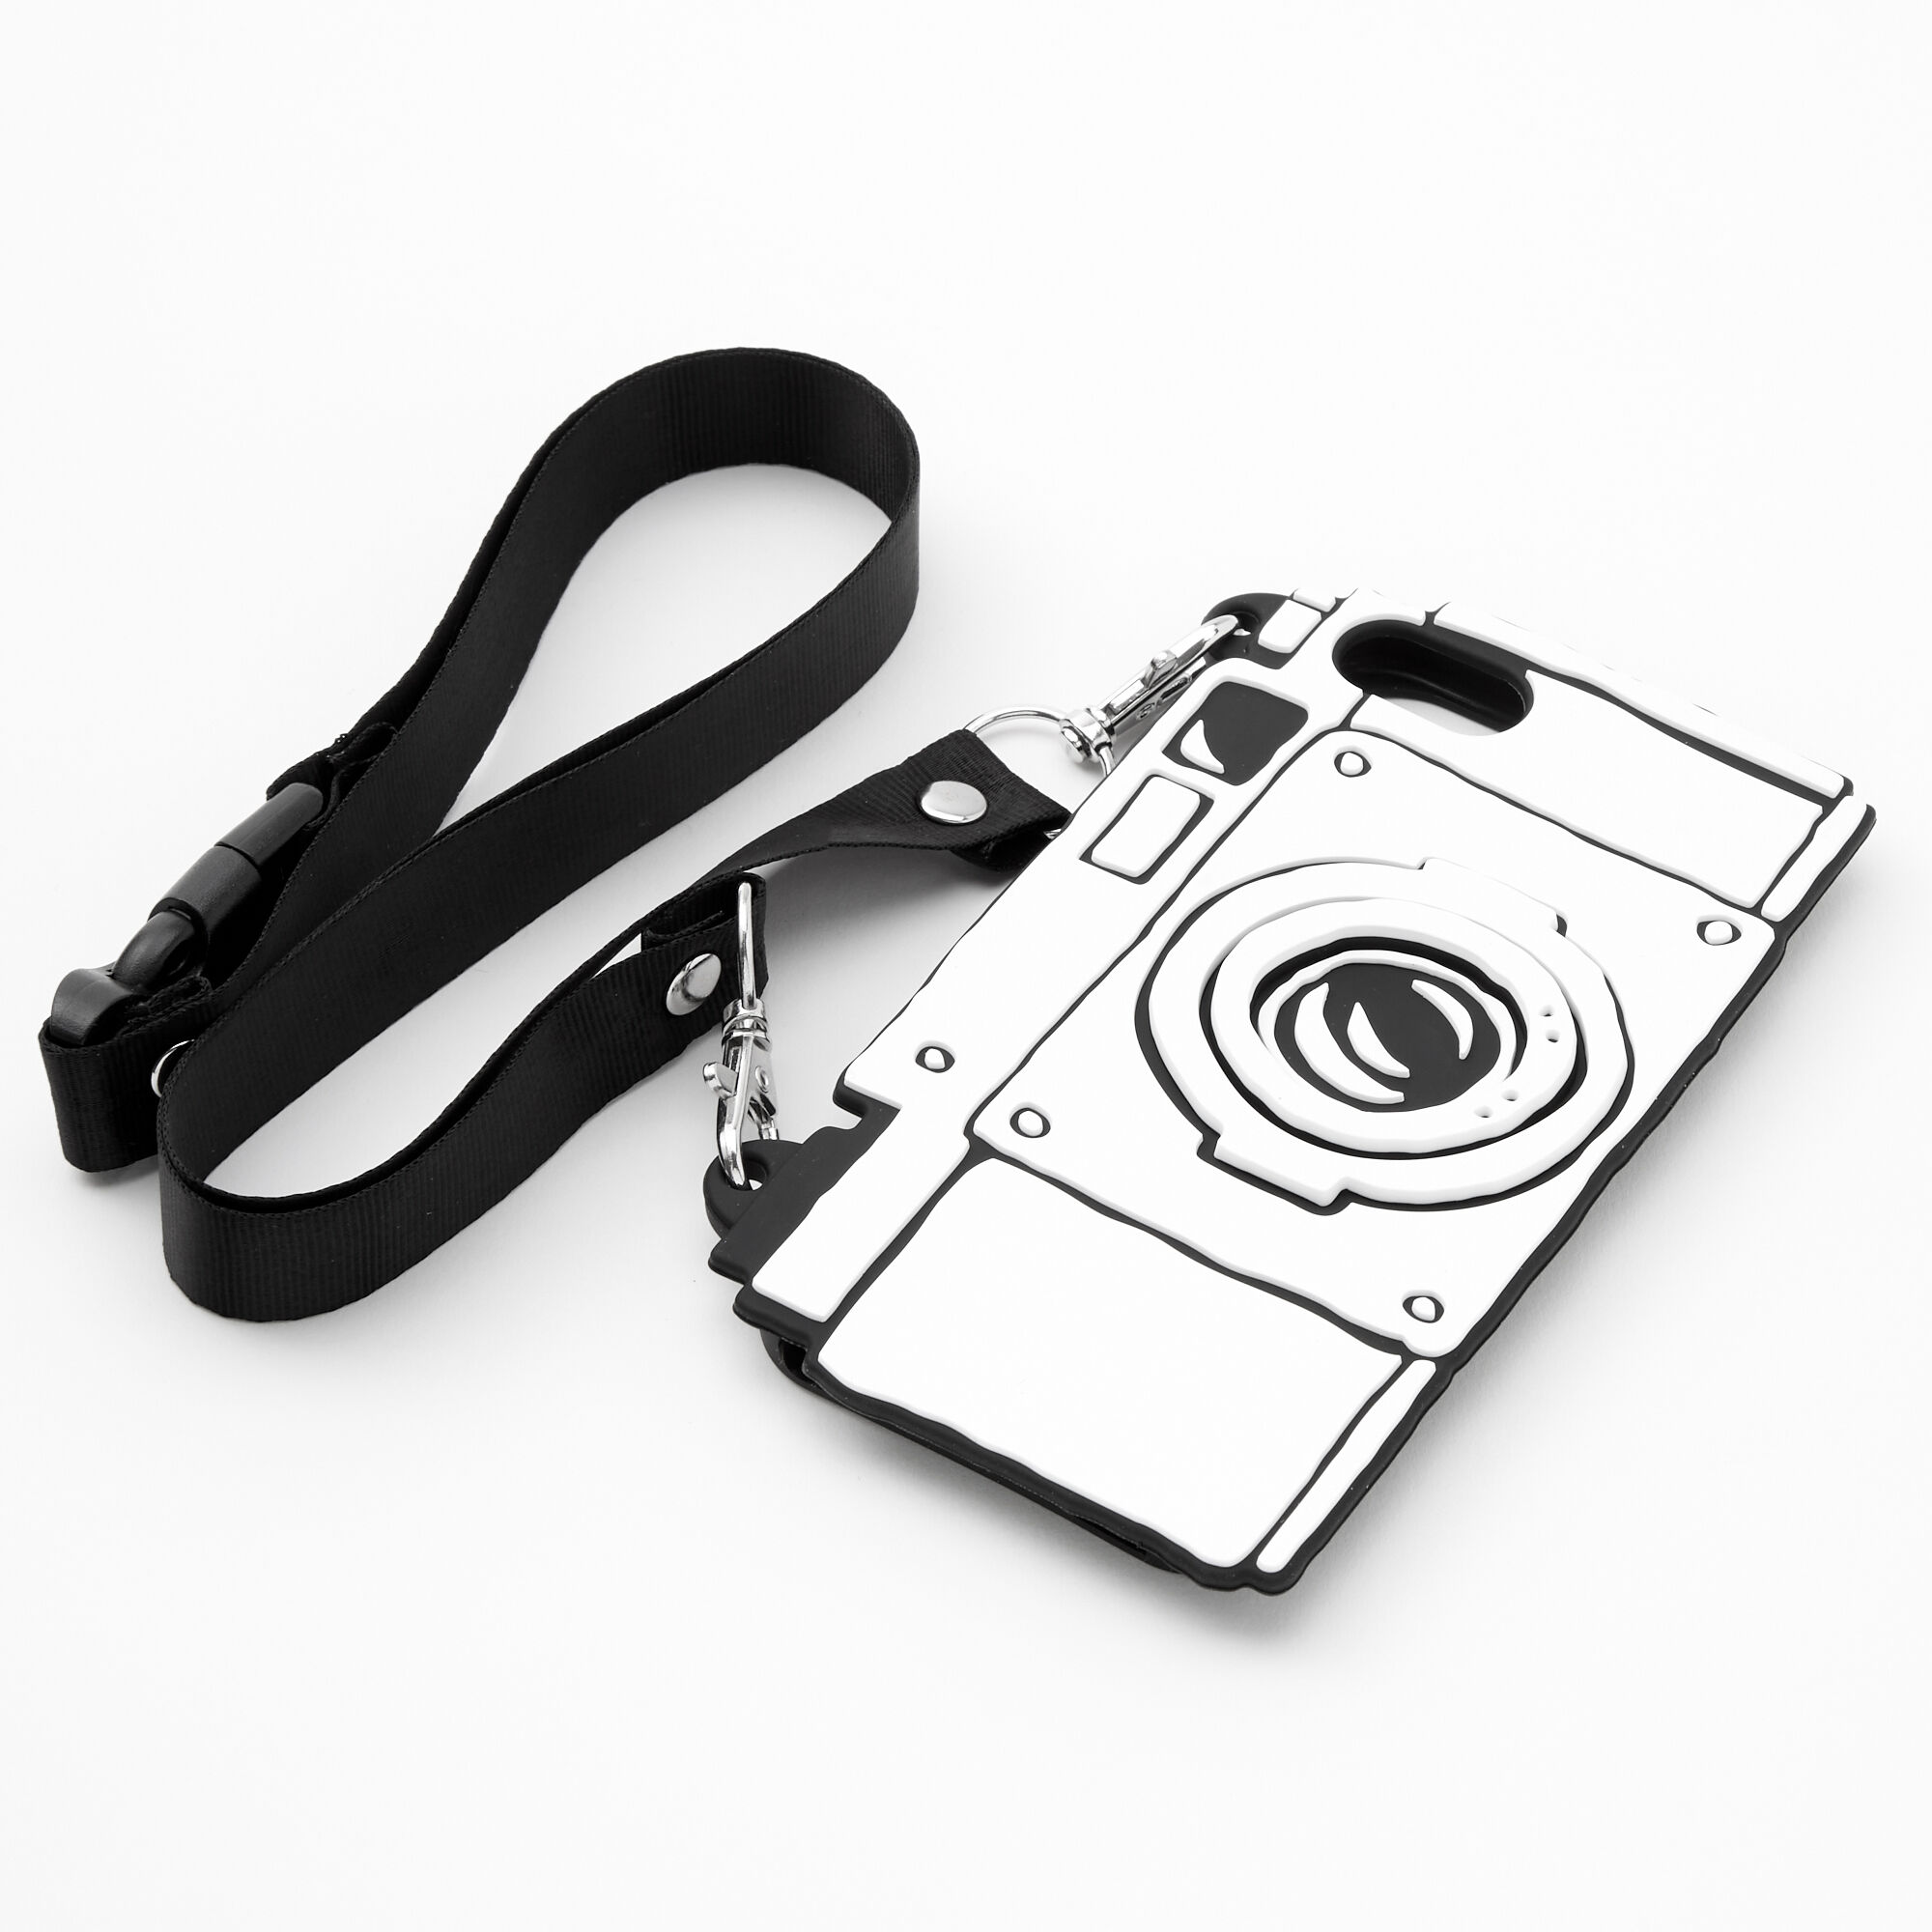 Black & White Camera Silicone Phone Case with Lanyard - Fits iPhone 6/7/8 SE